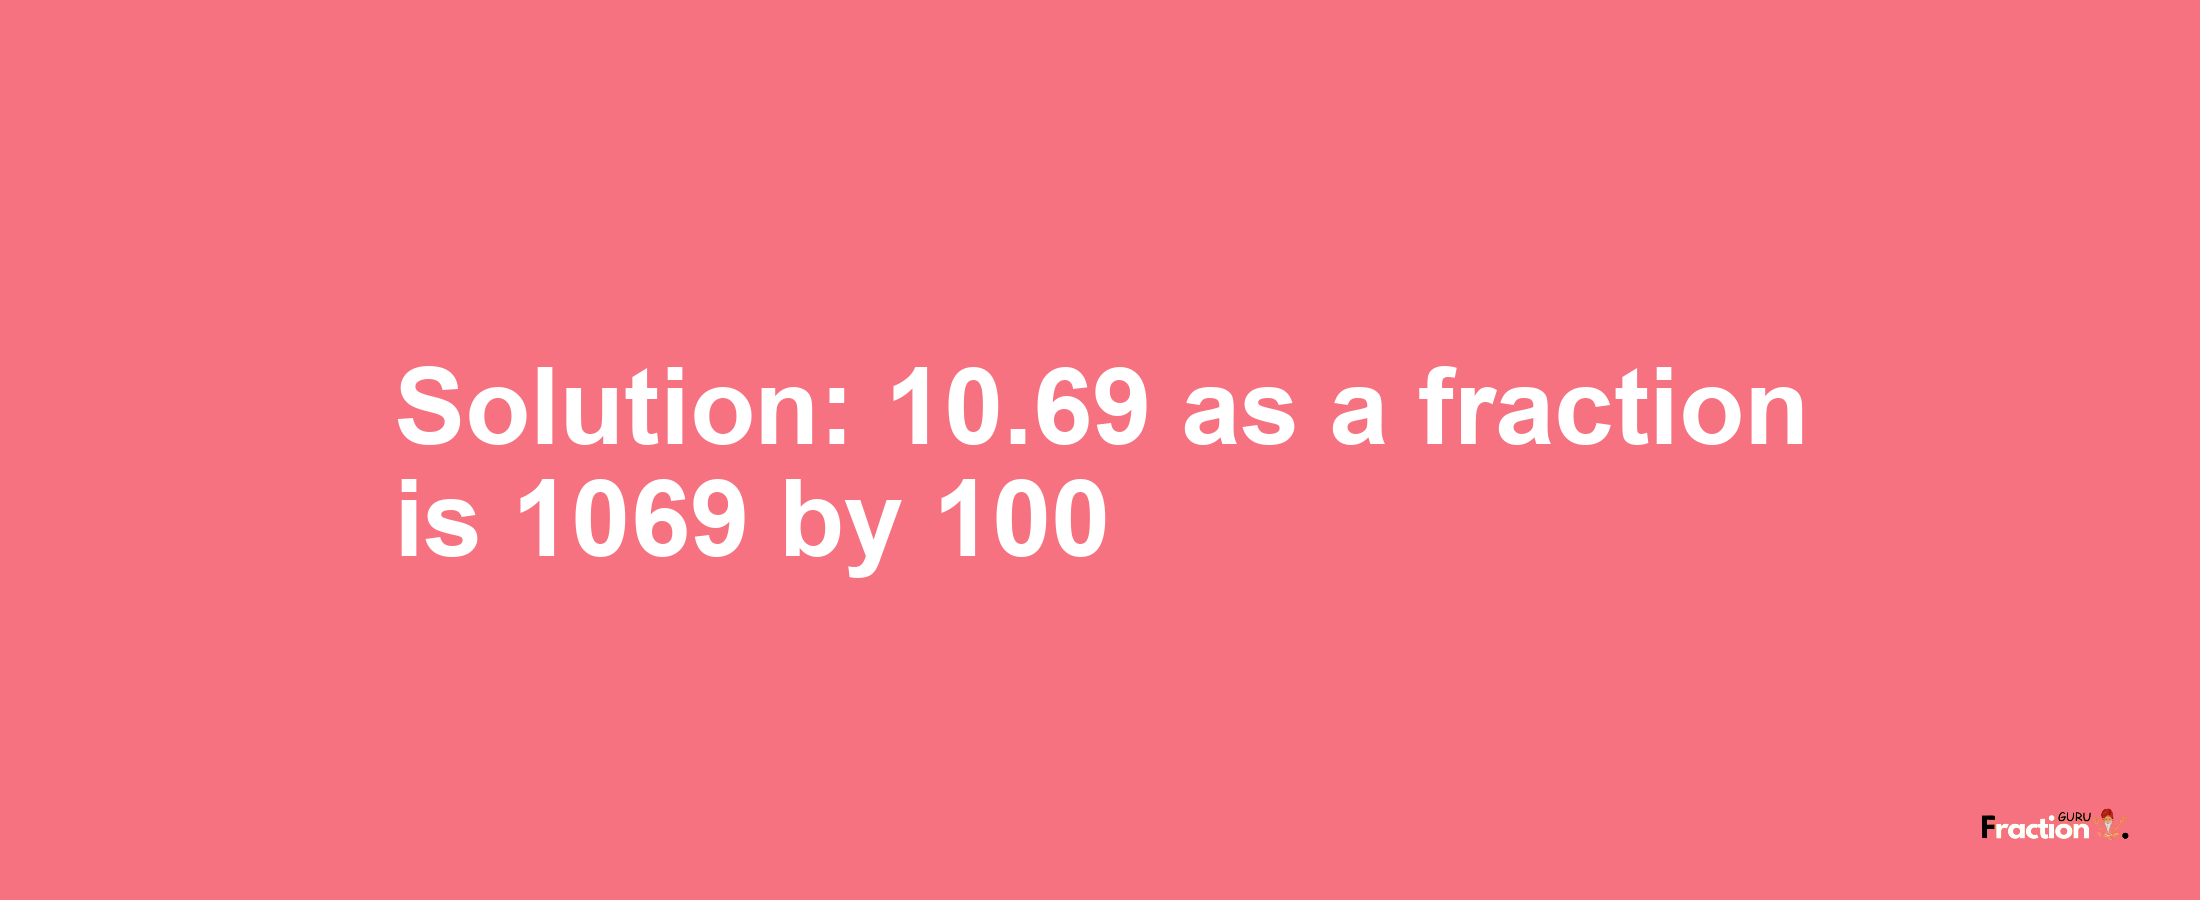 Solution:10.69 as a fraction is 1069/100